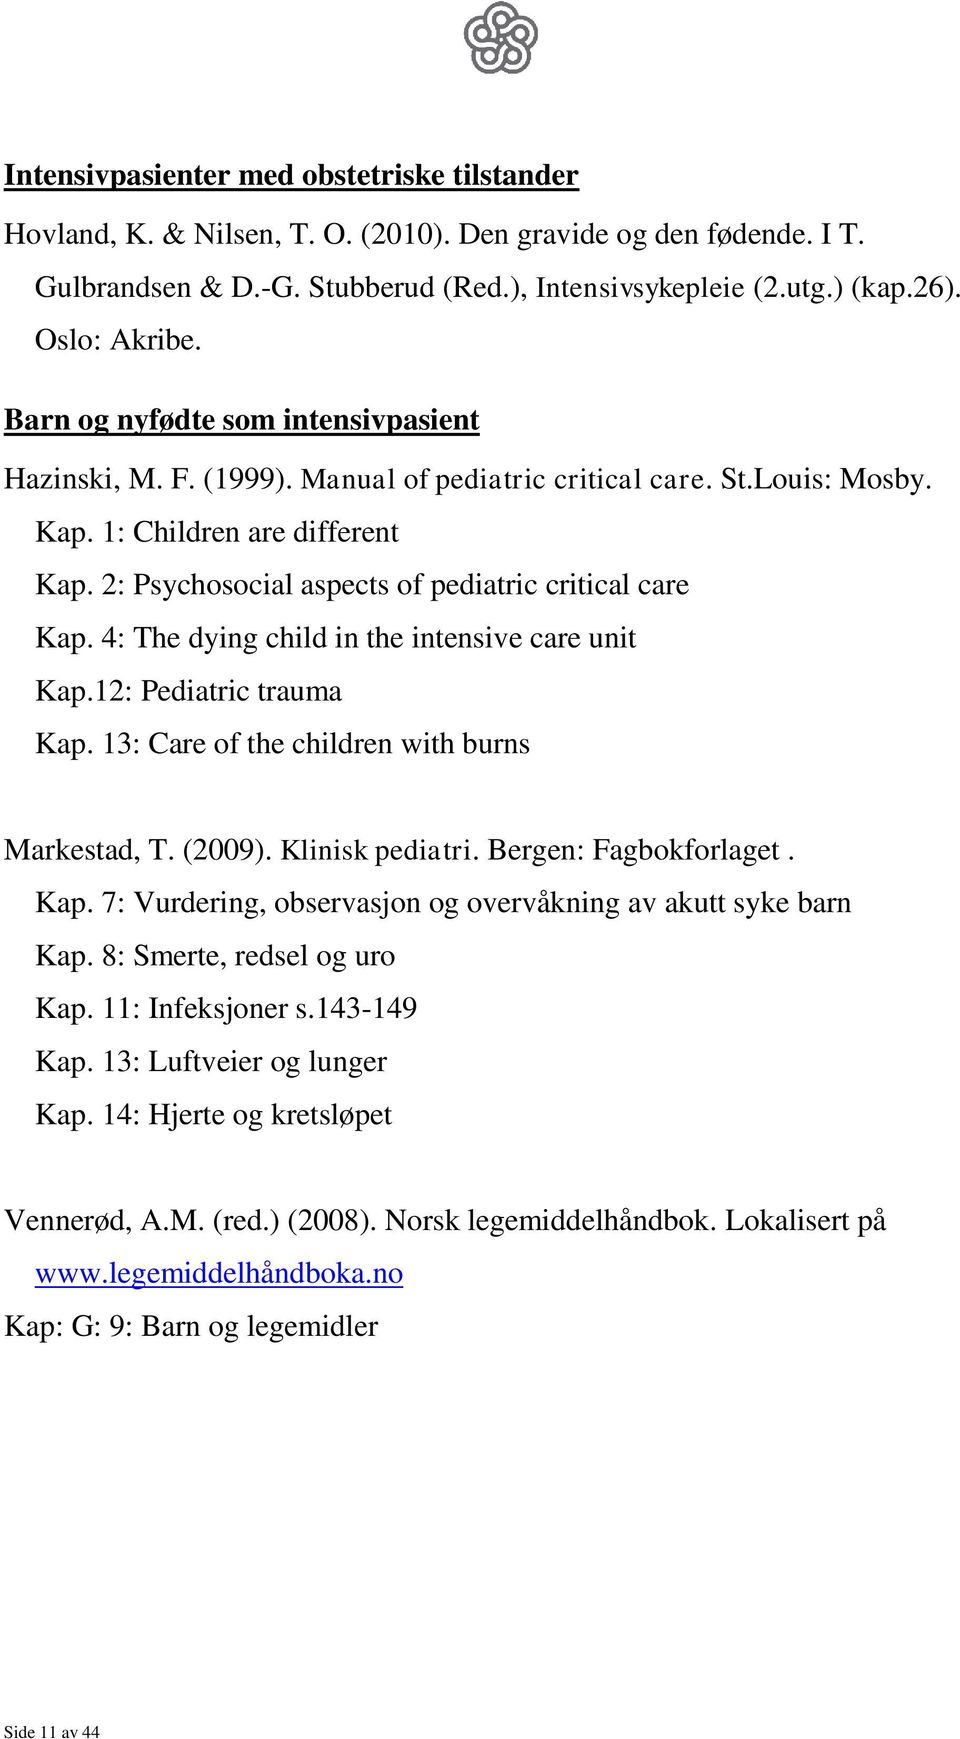 2: Psychosocial aspects of pediatric critical care Kap. 4: The dying child in the intensive care unit Kap.12: Pediatric trauma Kap. 13: Care of the children with burns Markestad, T. (2009).